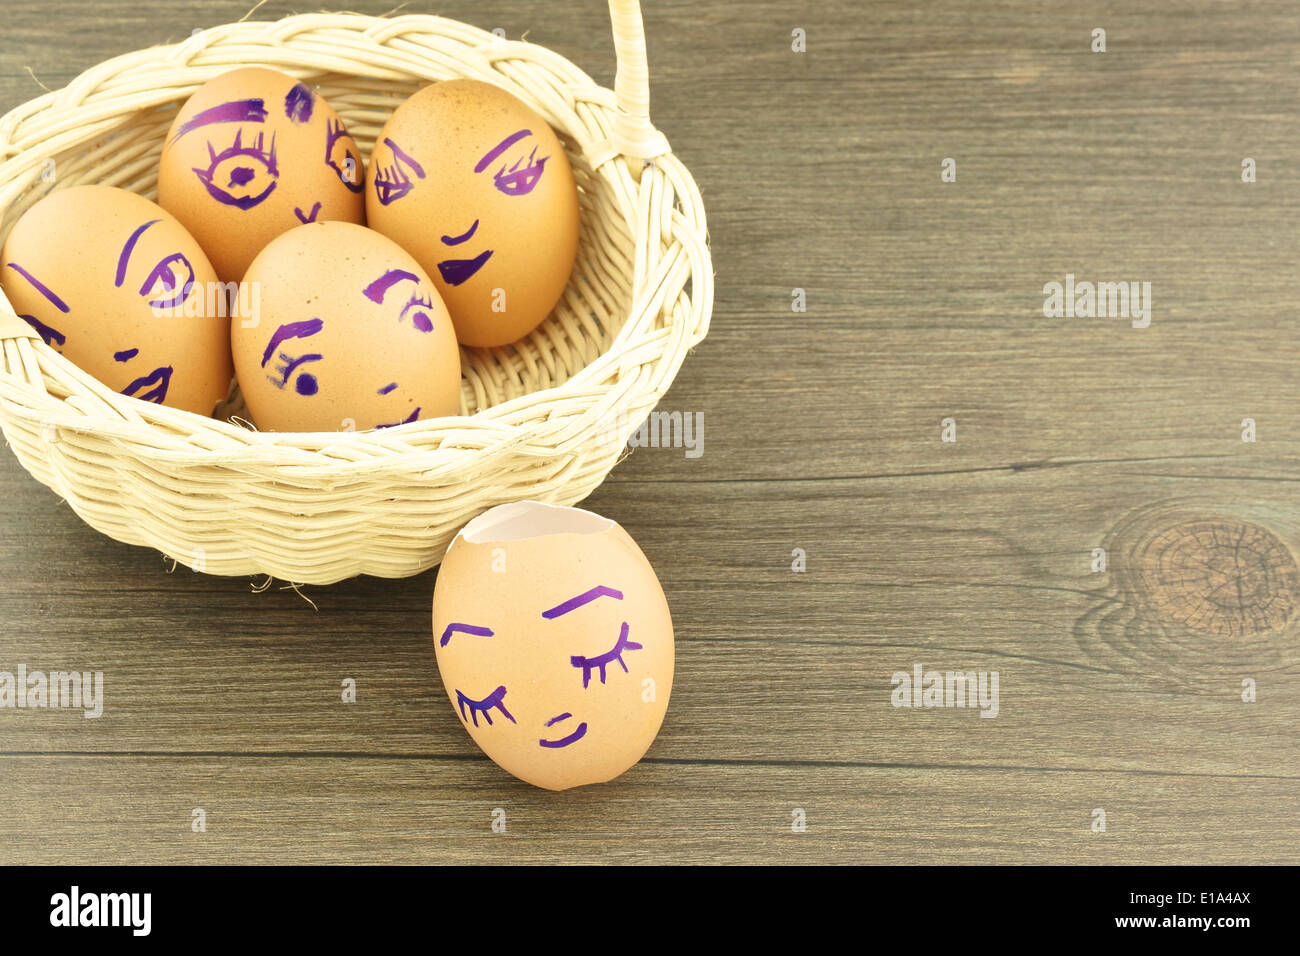 Happy and fun emoticons on empty eggshell in basket with wood background. Stock Photo